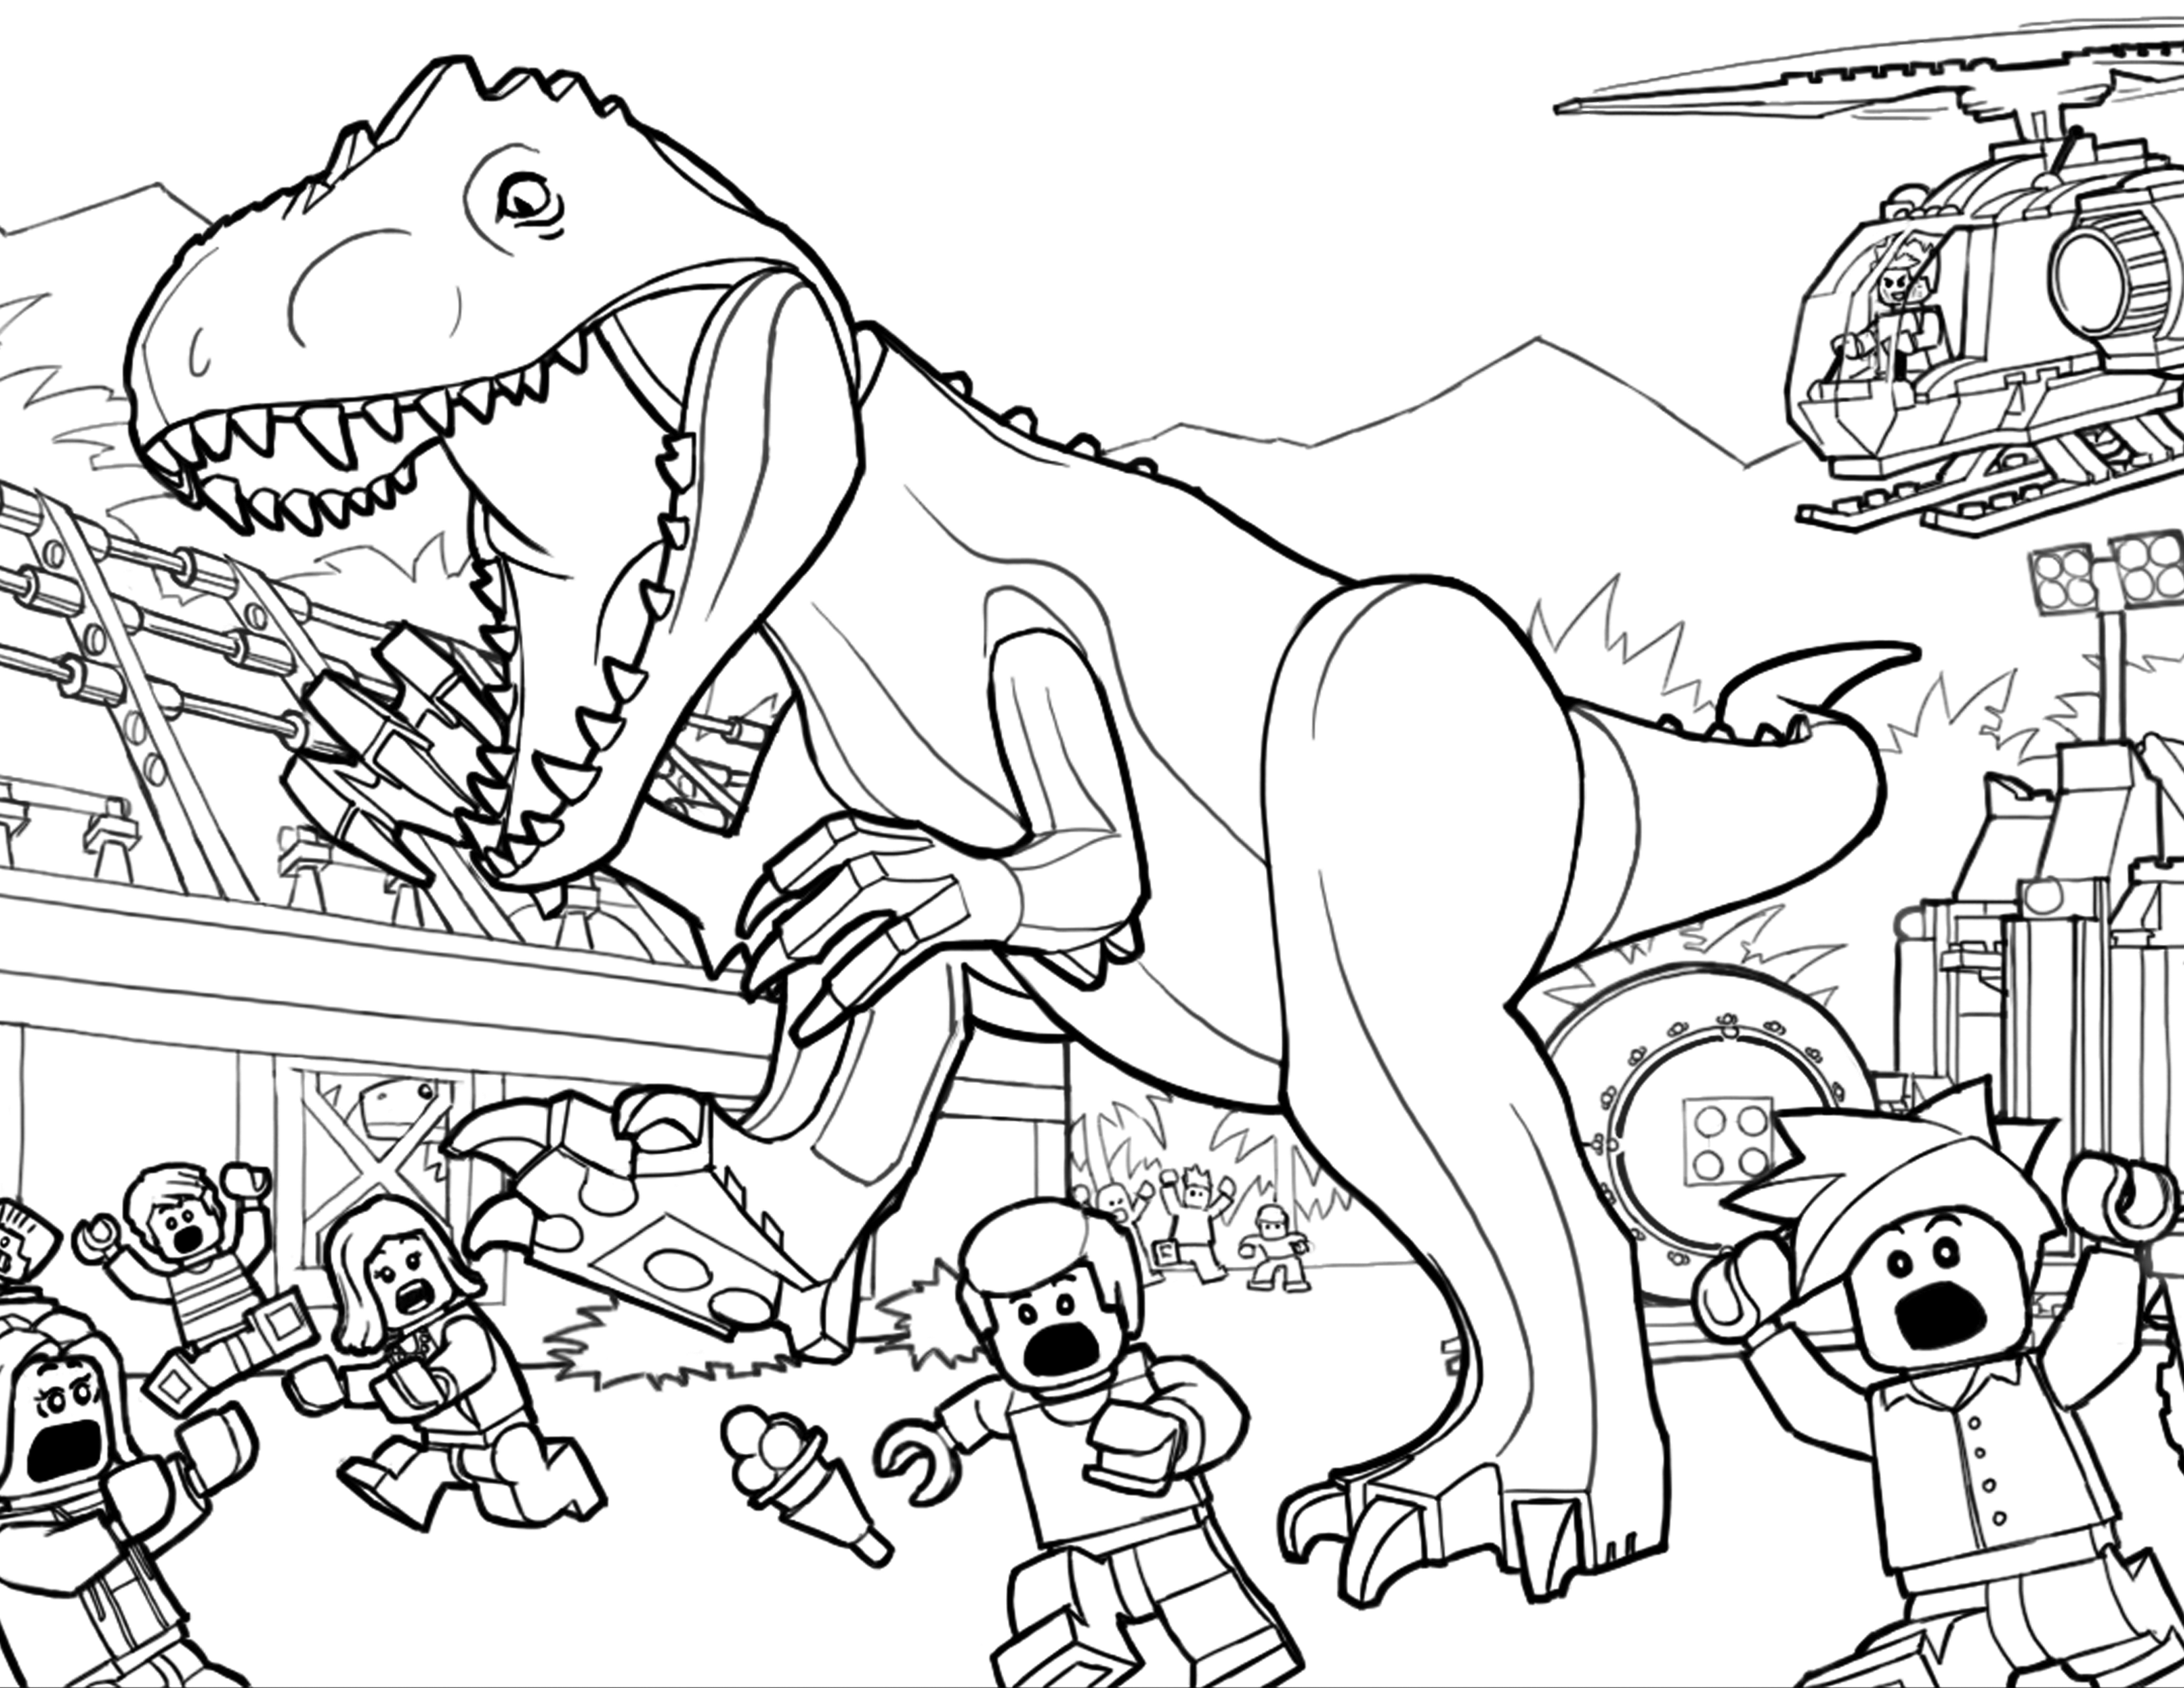 t rex coloring page dinosaurs t rex coloring pages bubakidscom rex coloring page t 